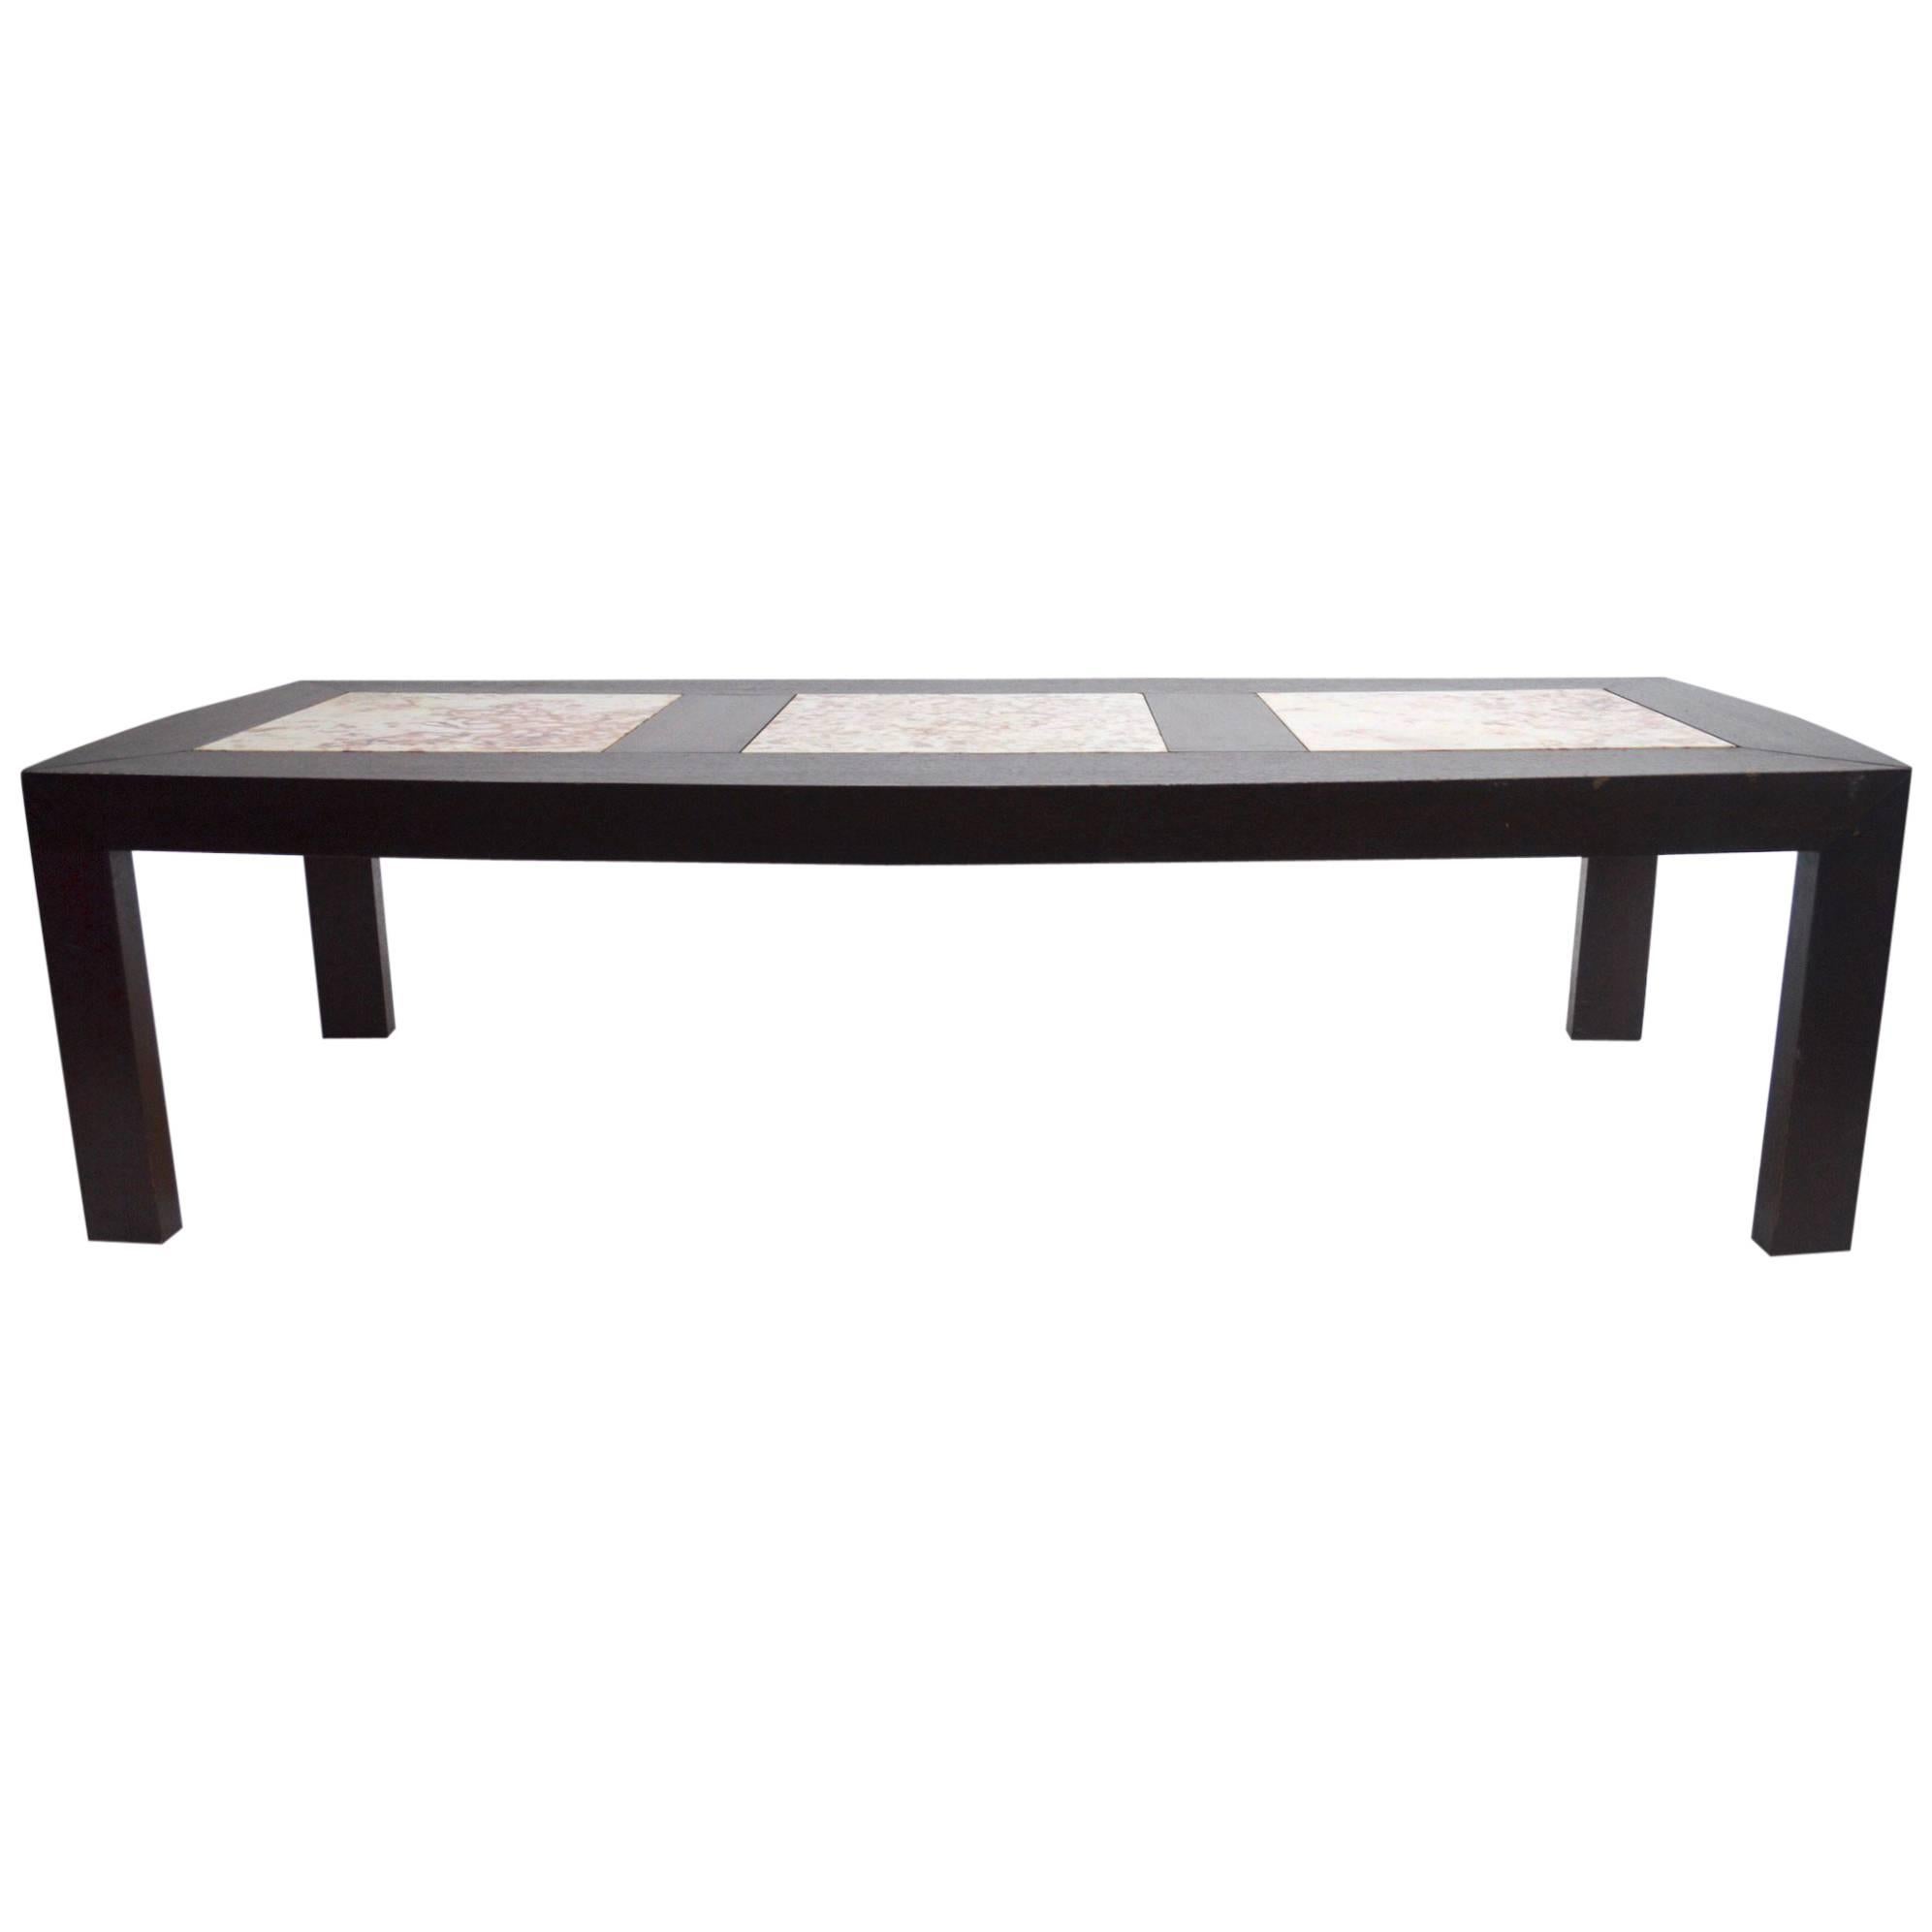 Tripartite Marble Insert Top Mid-Century Coffee Table Made in Malaysia For Sale